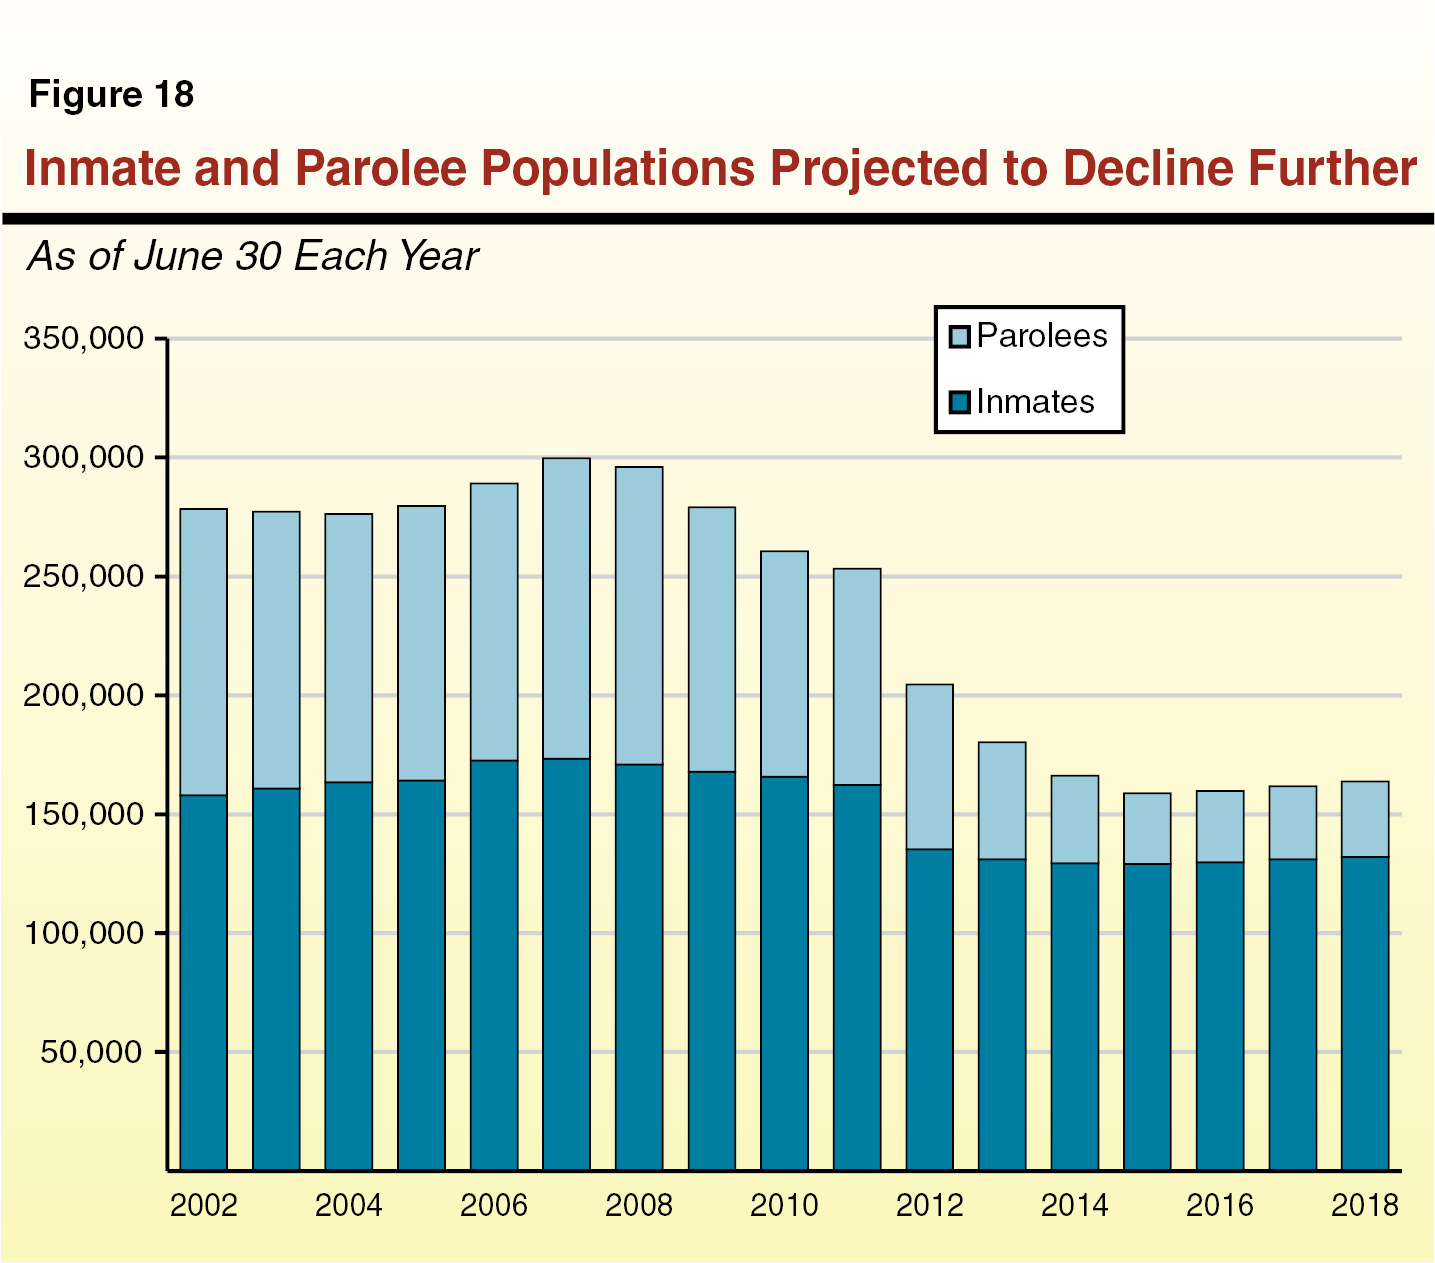 Inmate and Parolee Populations Projected to Decline Further